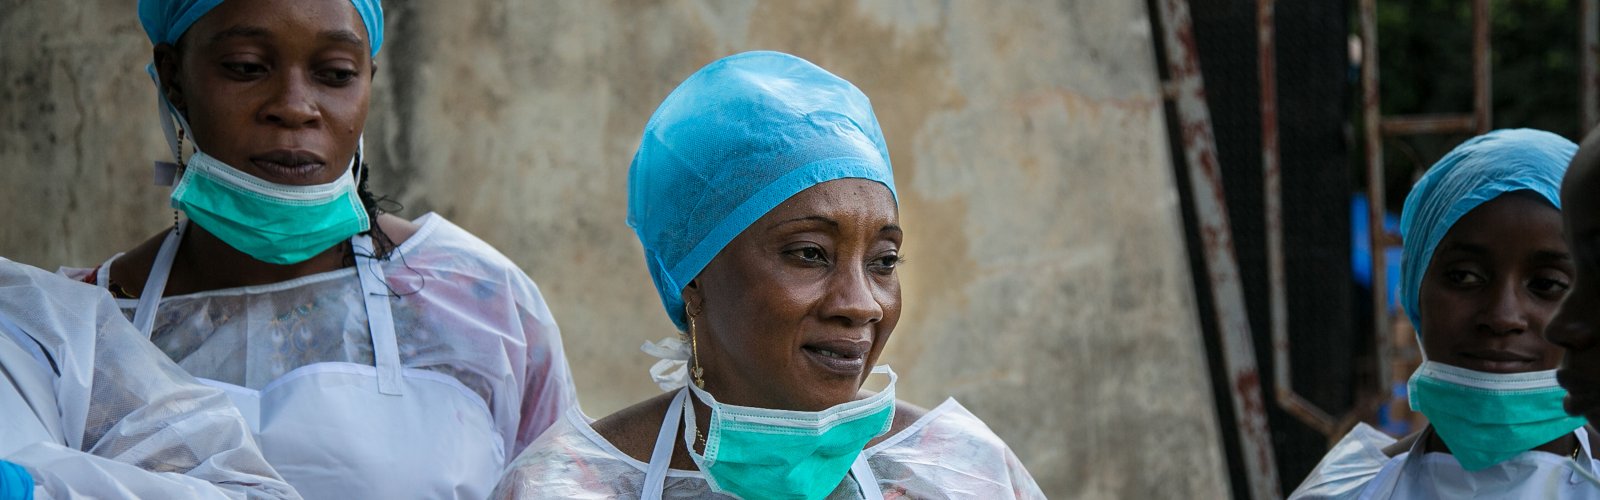 Public health workers learn how to use personal protective equipment at a CDC-GHSA facilitated training in Guinea.